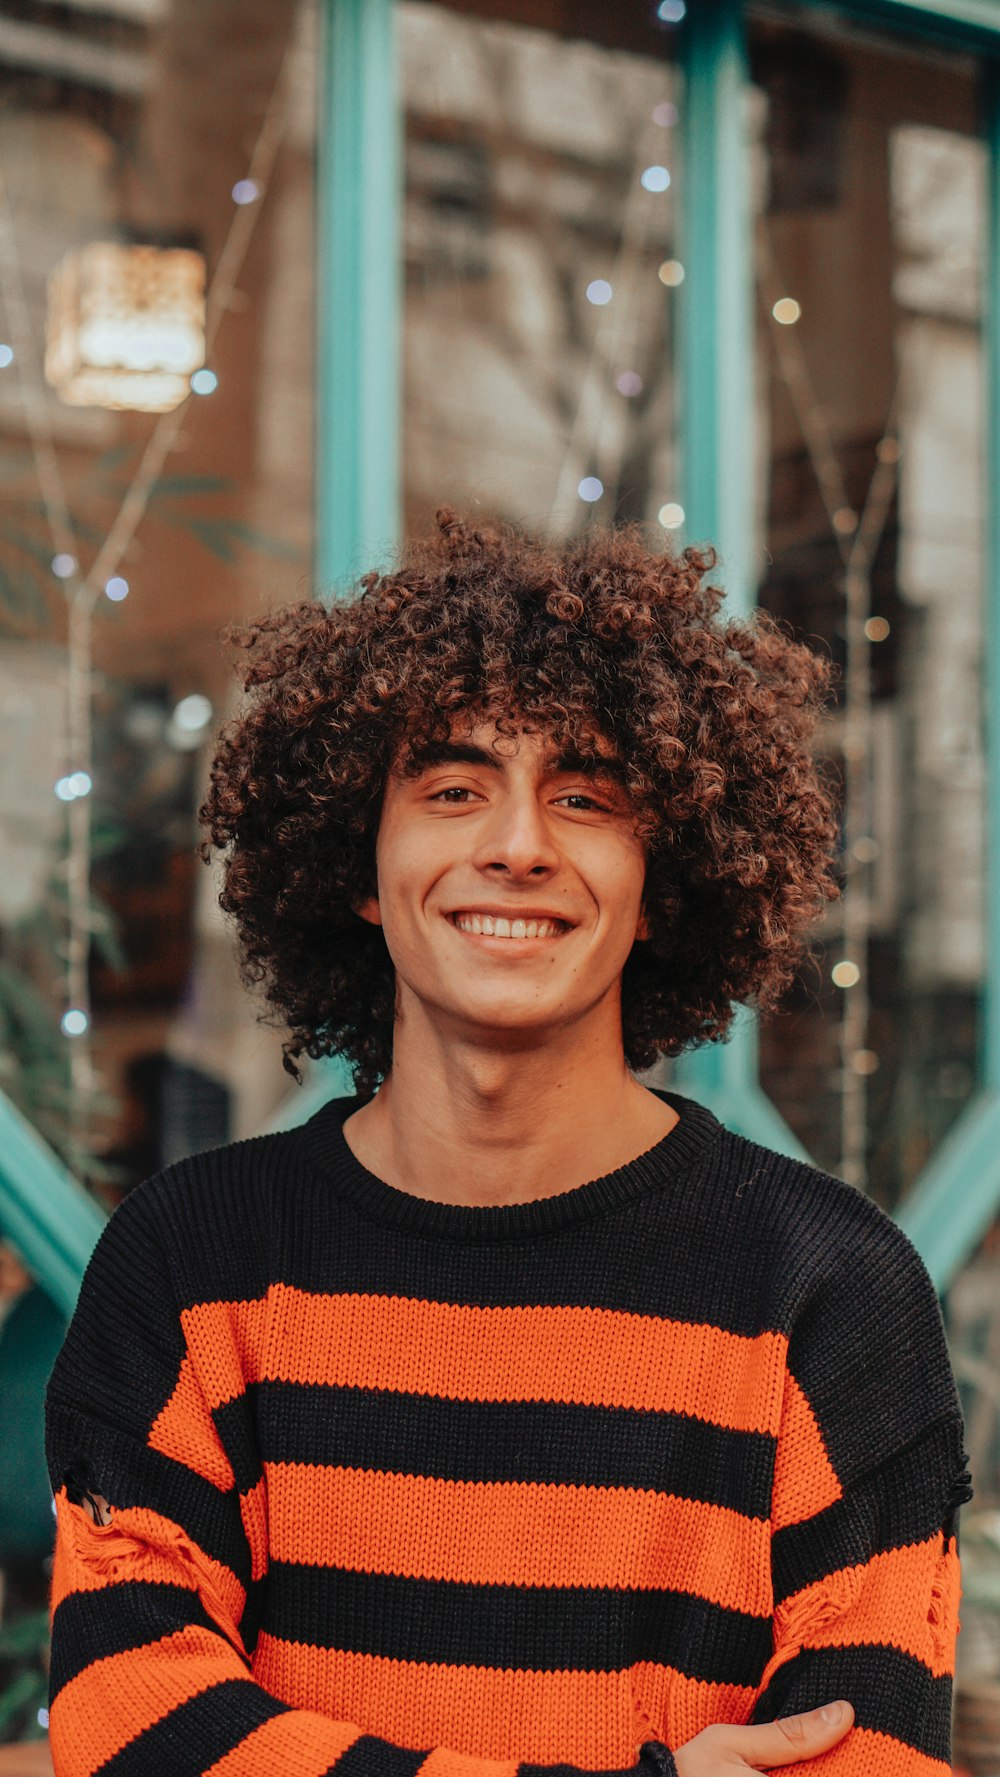 a man with curly hair wearing an orange and black striped sweater